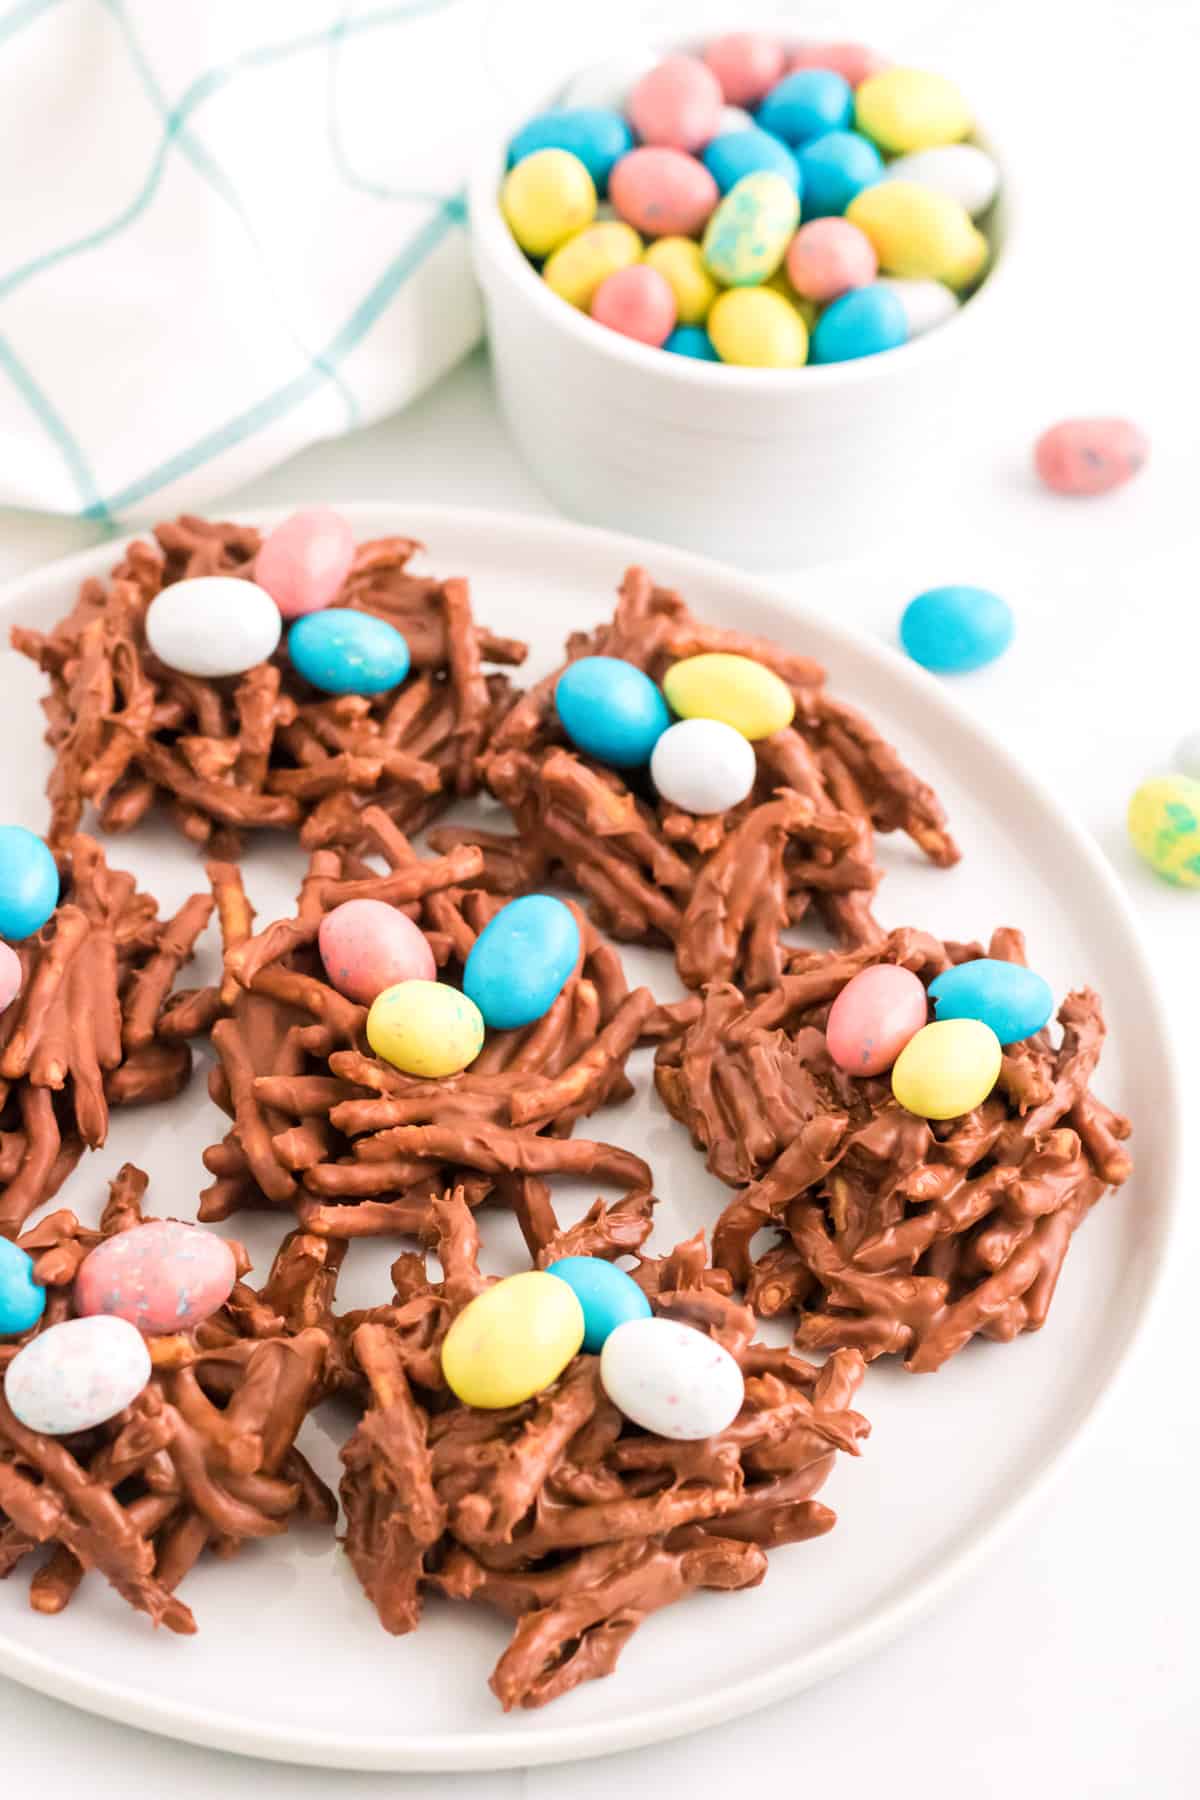 No-bake chocolate birds nest cookies arranged on a white plate with additional colored eggs in the background.